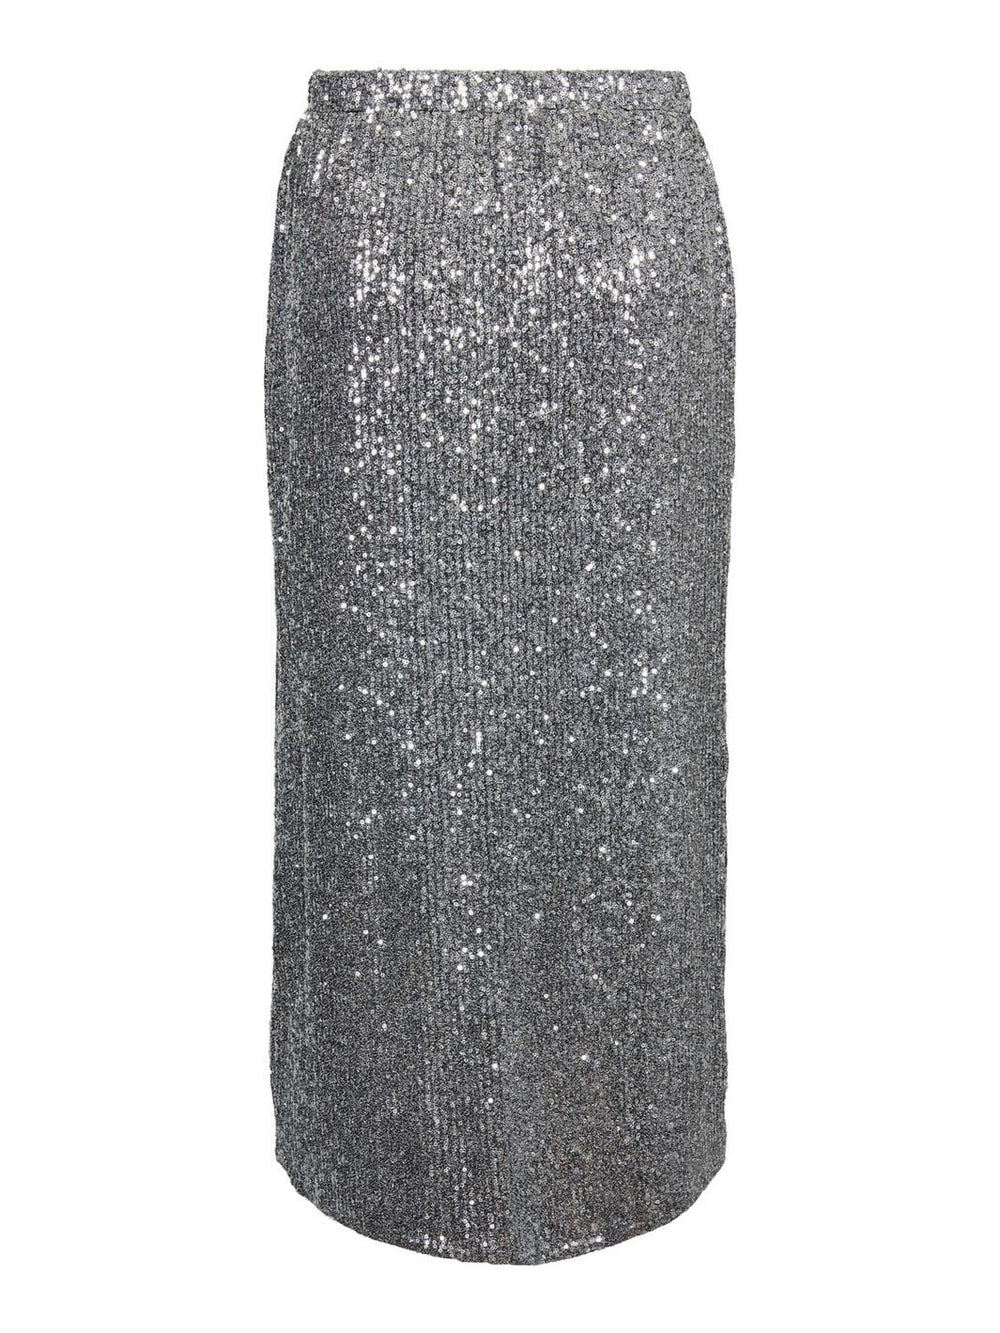 Pieces - Pcniri Ankle Skirt - 4509878 Silver Sequins